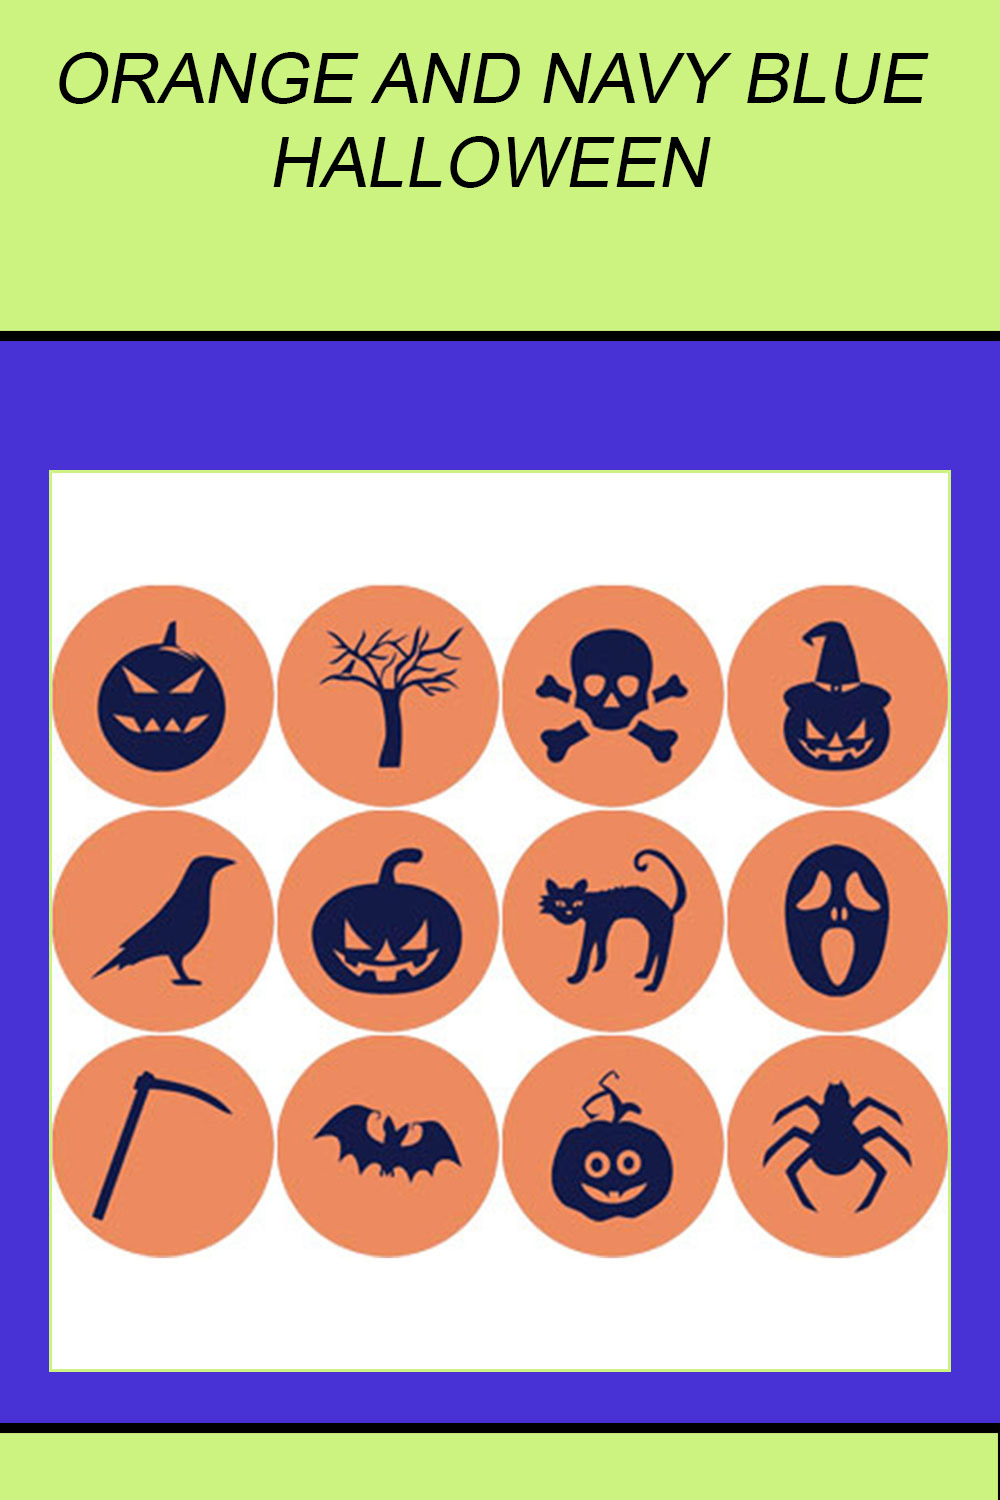 ORANGE AND NAVY BLUE HALLOWEEN ROUND ICONS pinterest preview image.